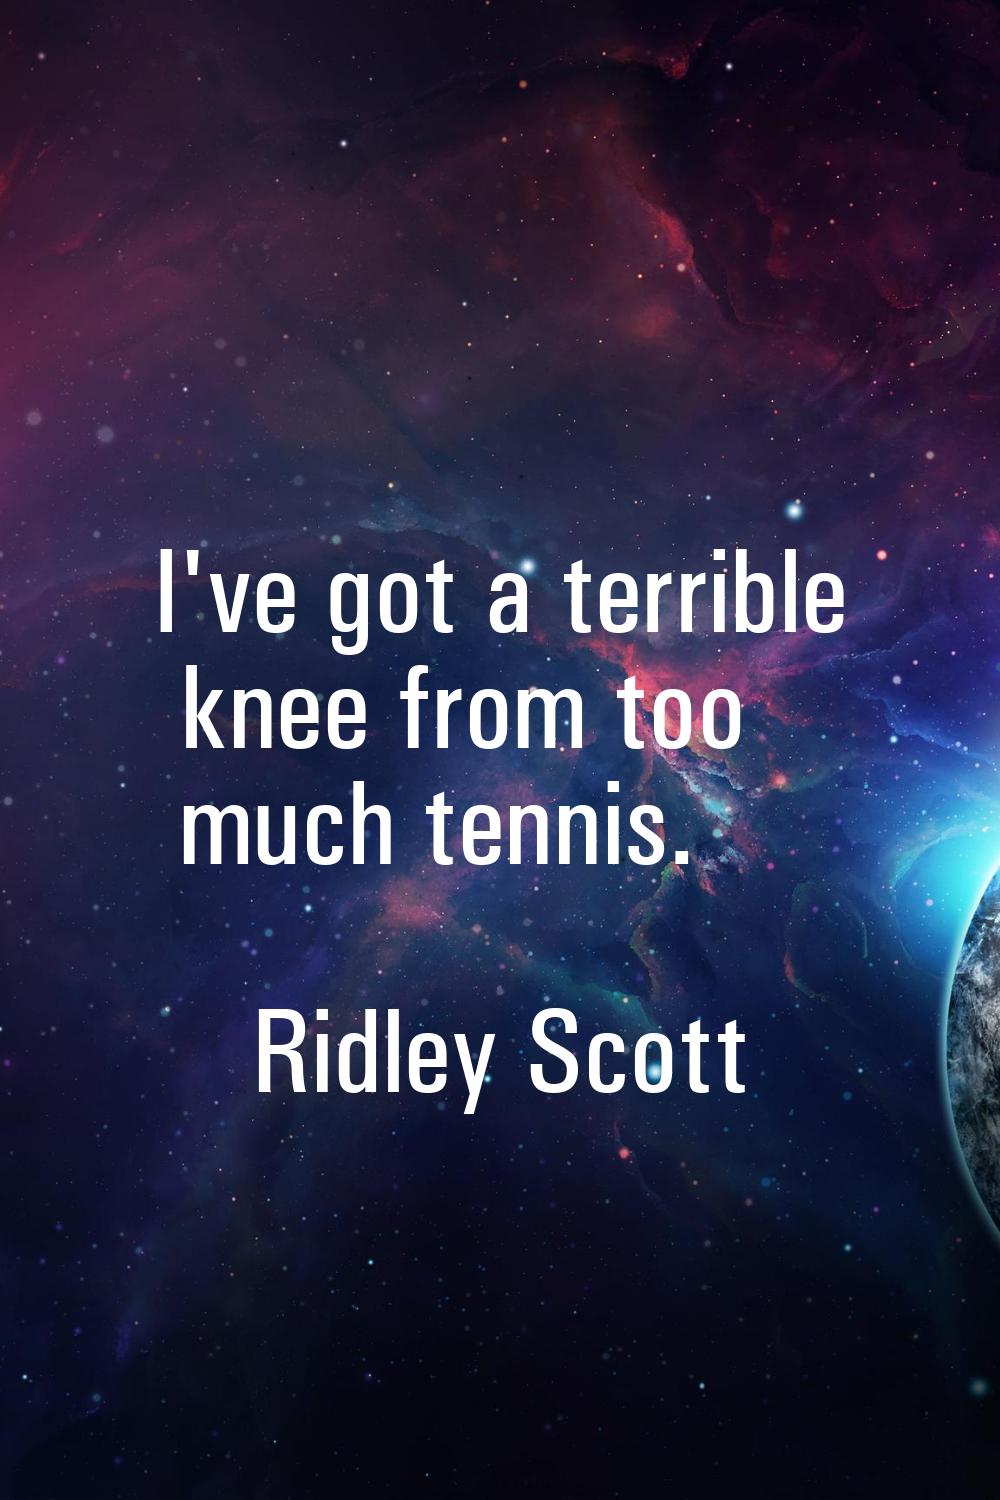 I've got a terrible knee from too much tennis.